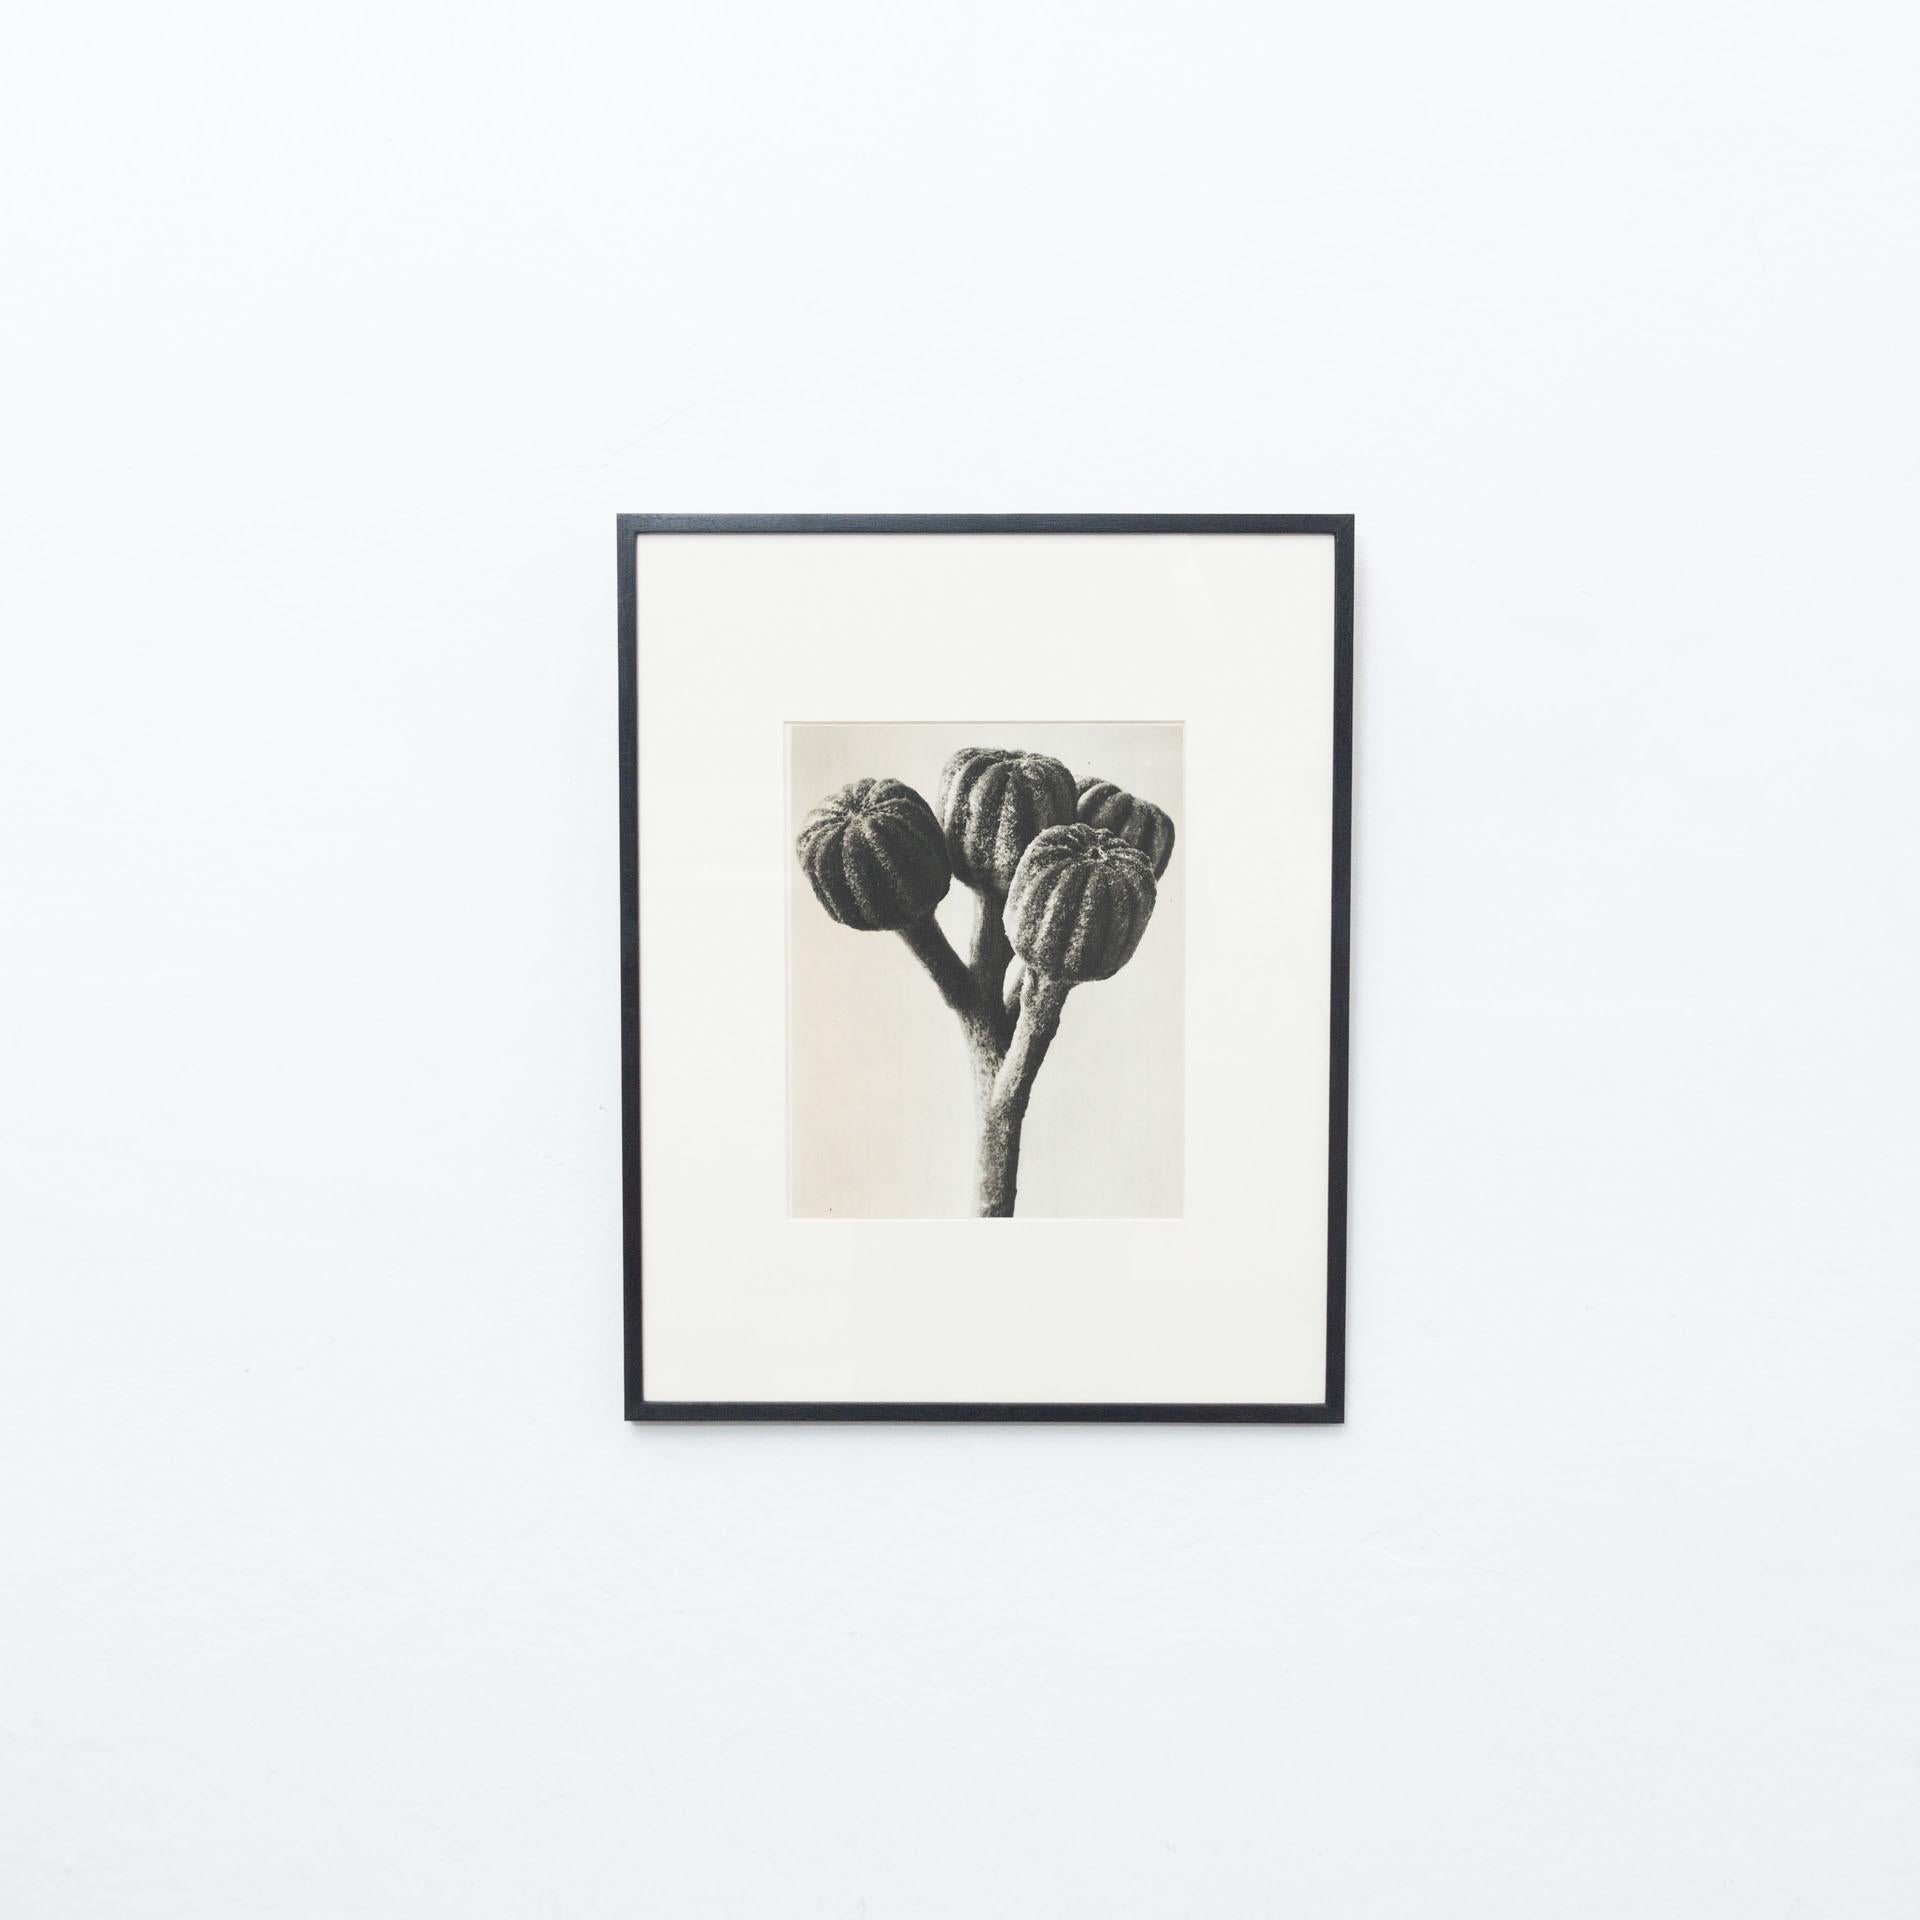 Karl Blossfeldt Photogravure from the edition of the book 'Wunder in der Natur' in 1942.

Photography number 74. 
In original condition, with minor wear consistent with age and use, preserving a beautiful patina.

Karl Blossfeldt (June 13, 1865